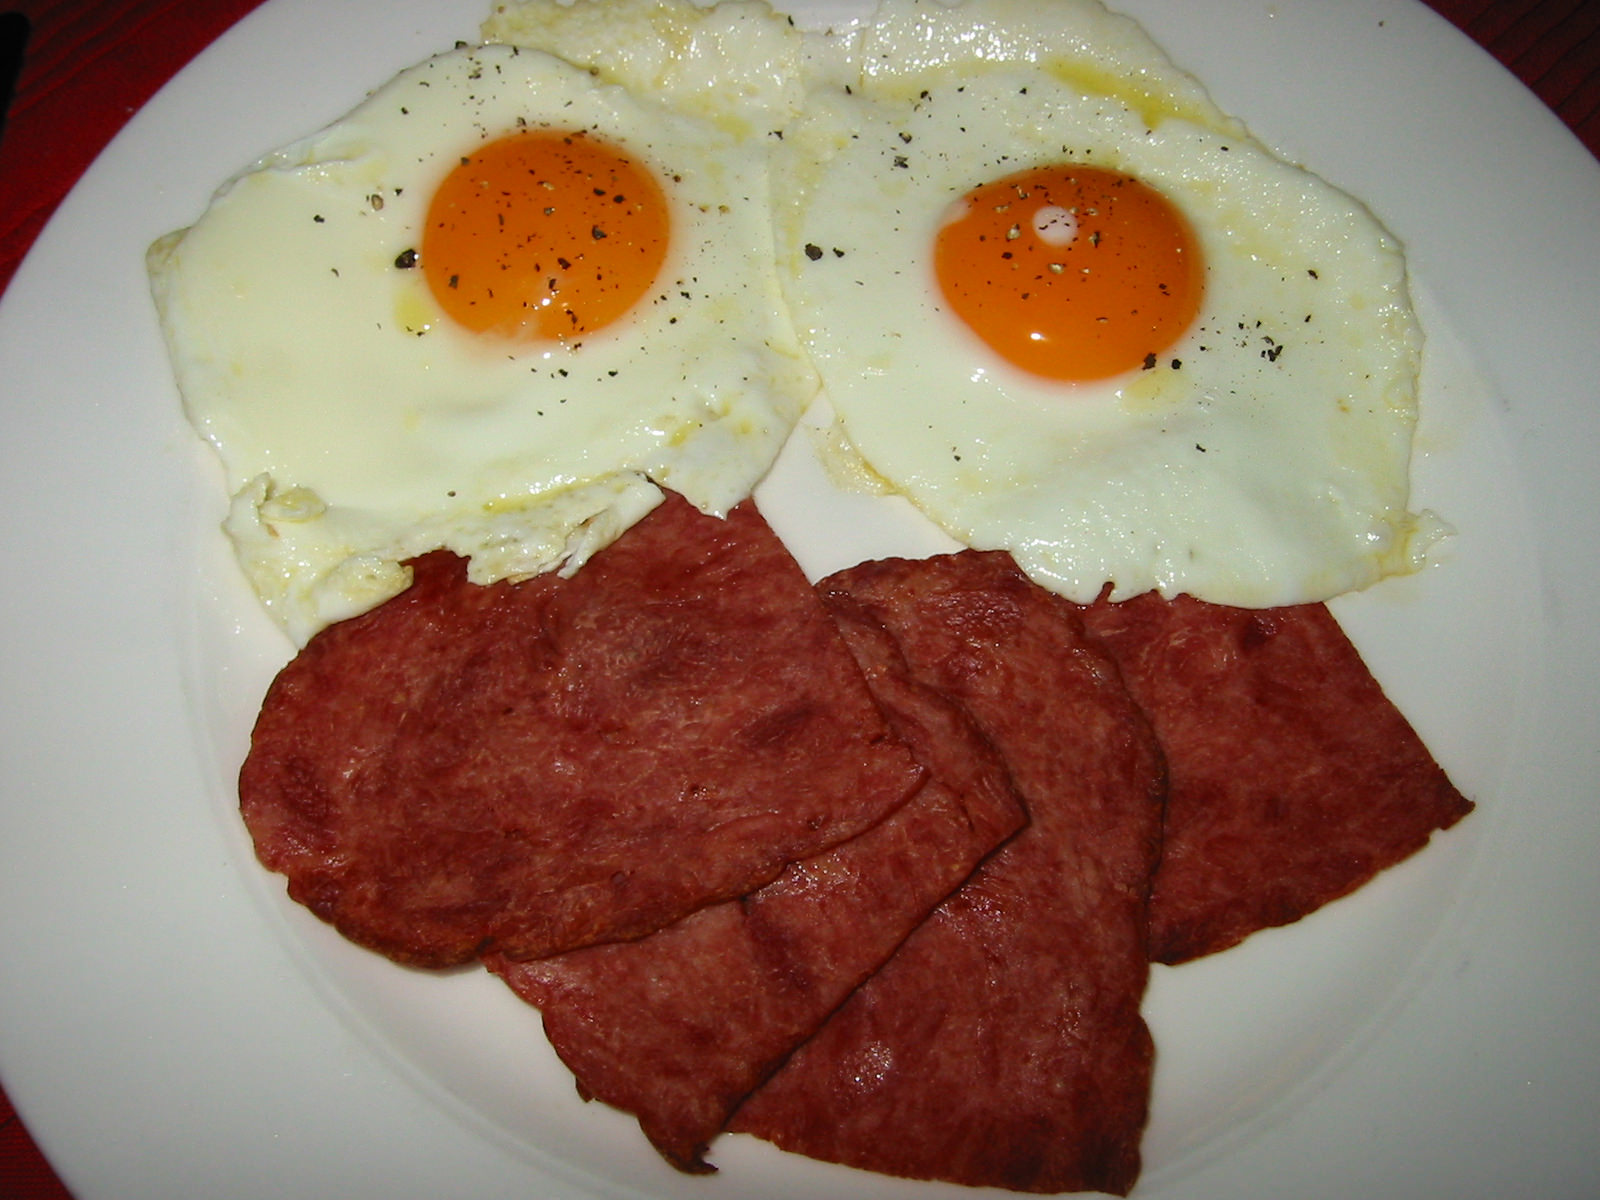 Turkey bacon and eggs, Cookie Monster style